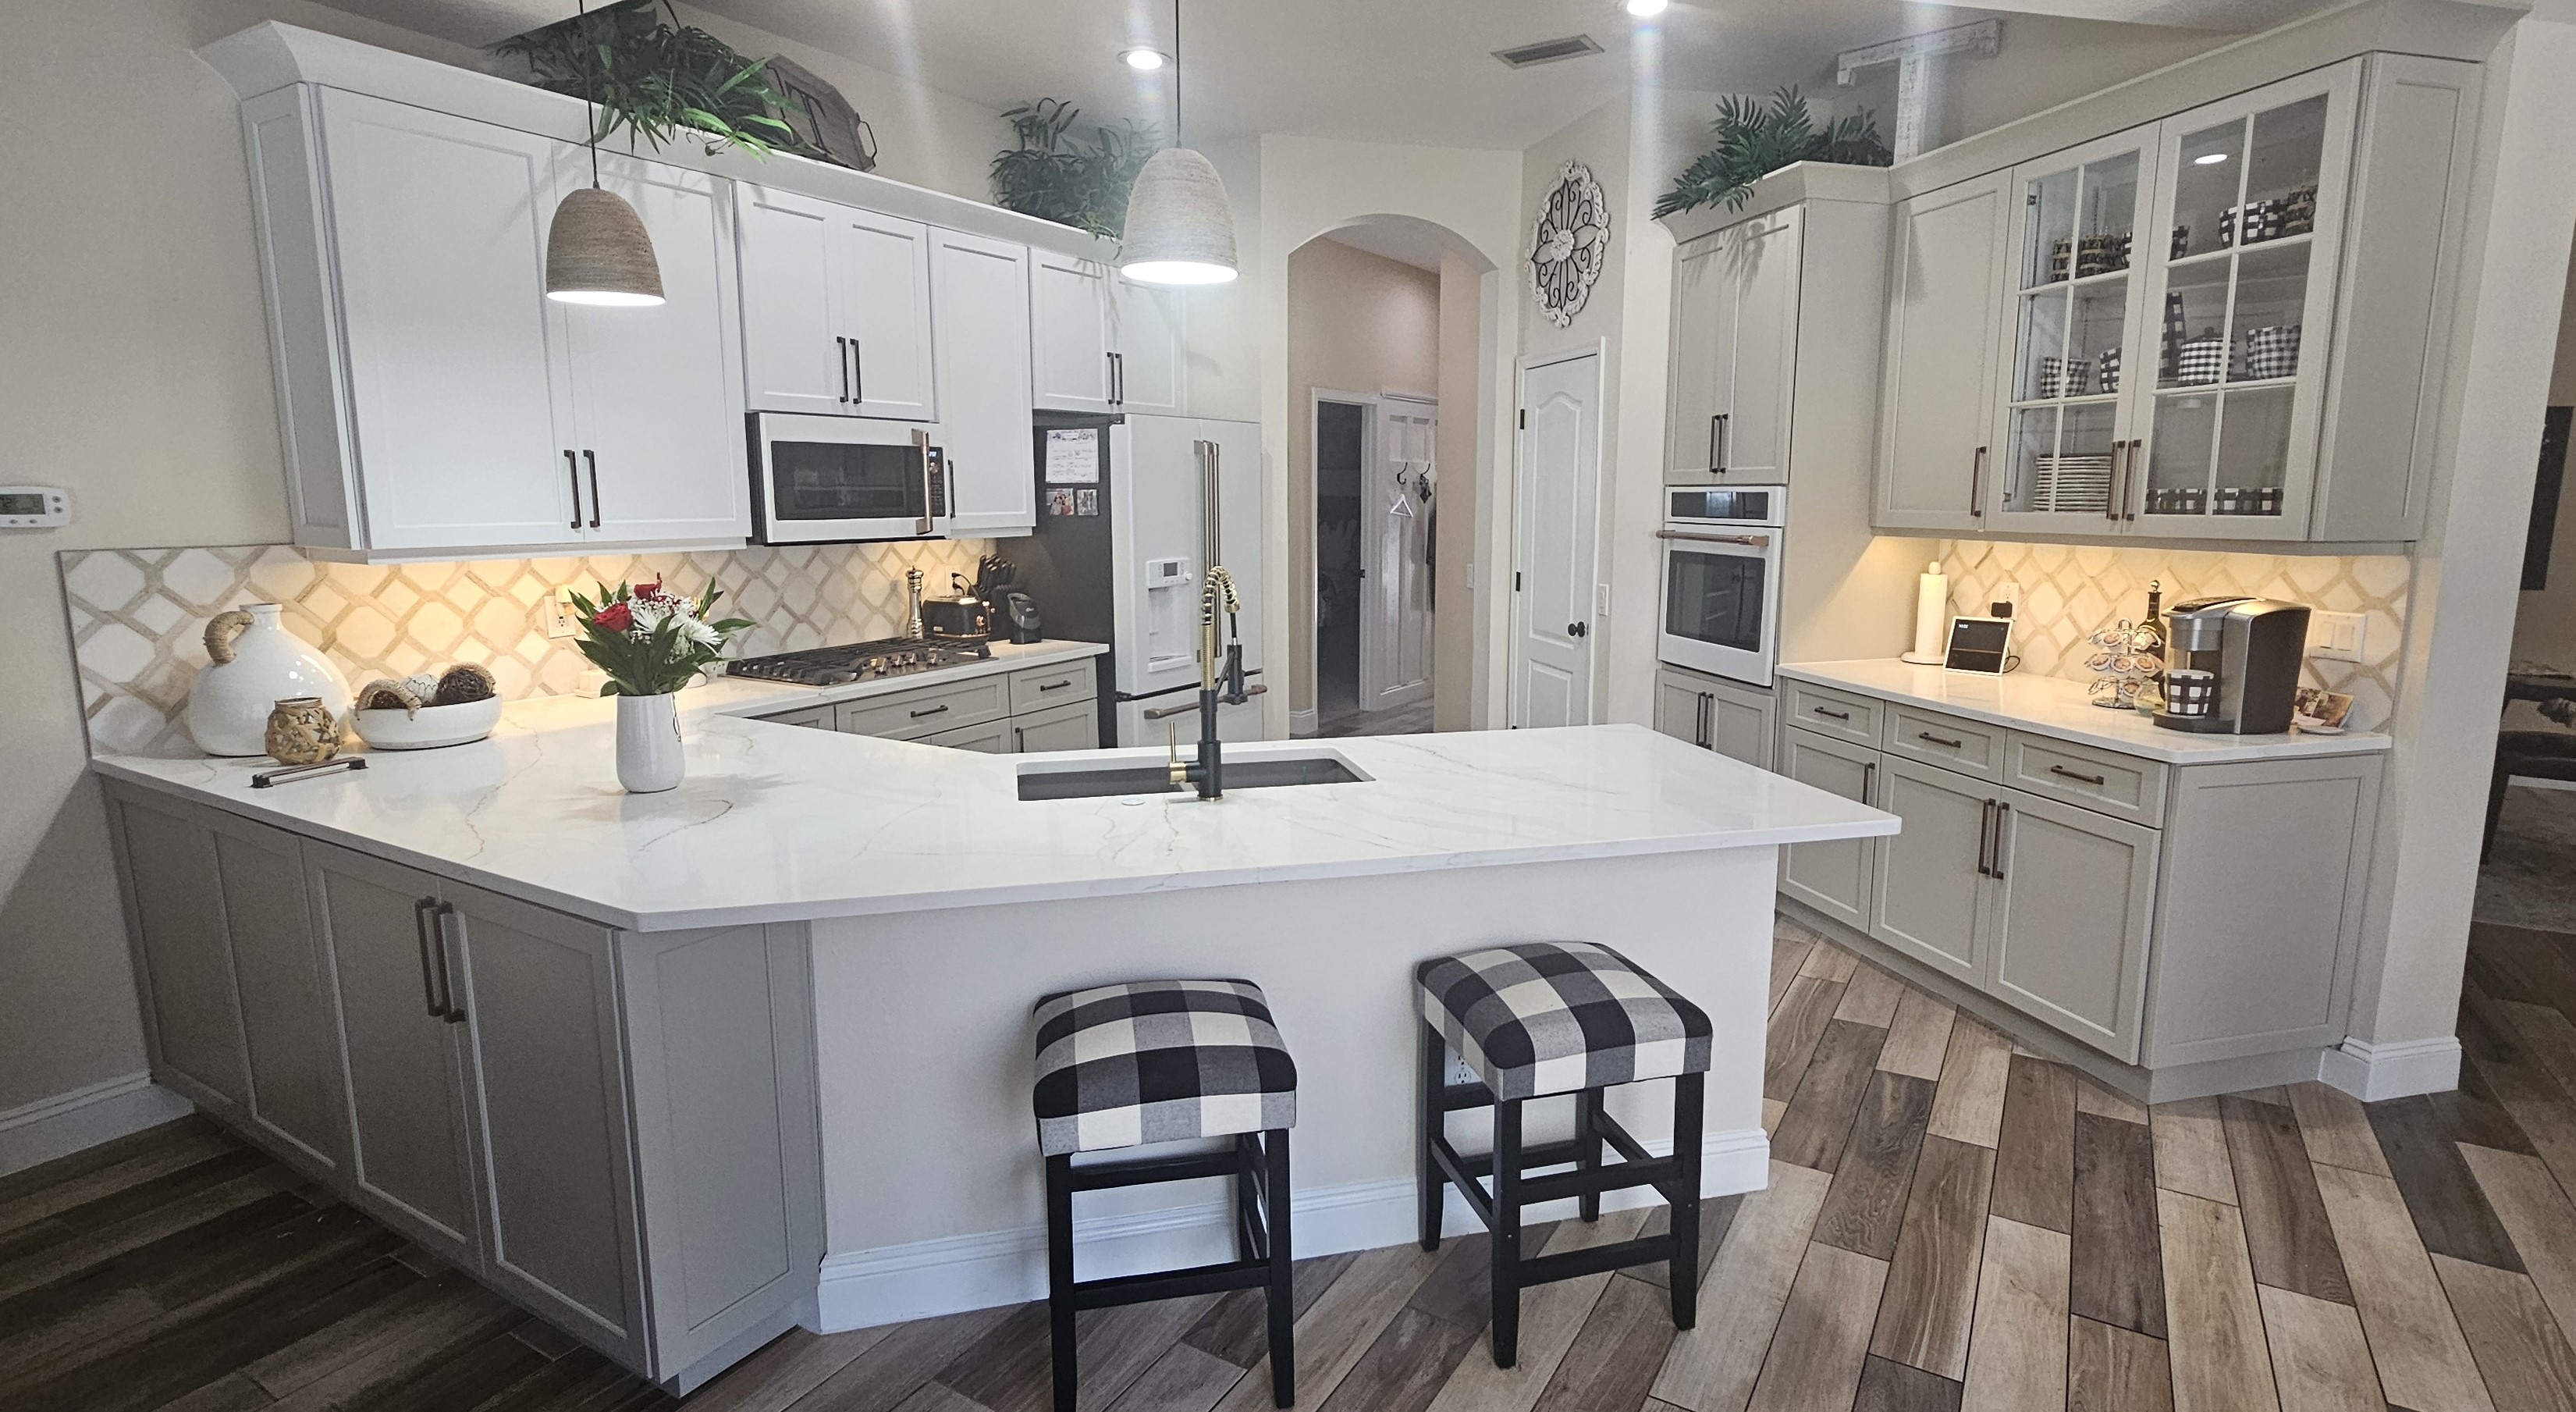 Modern appliances with a high-quality finish, granite worktops, and sleek white kitchen cabinets in South Pasadena.